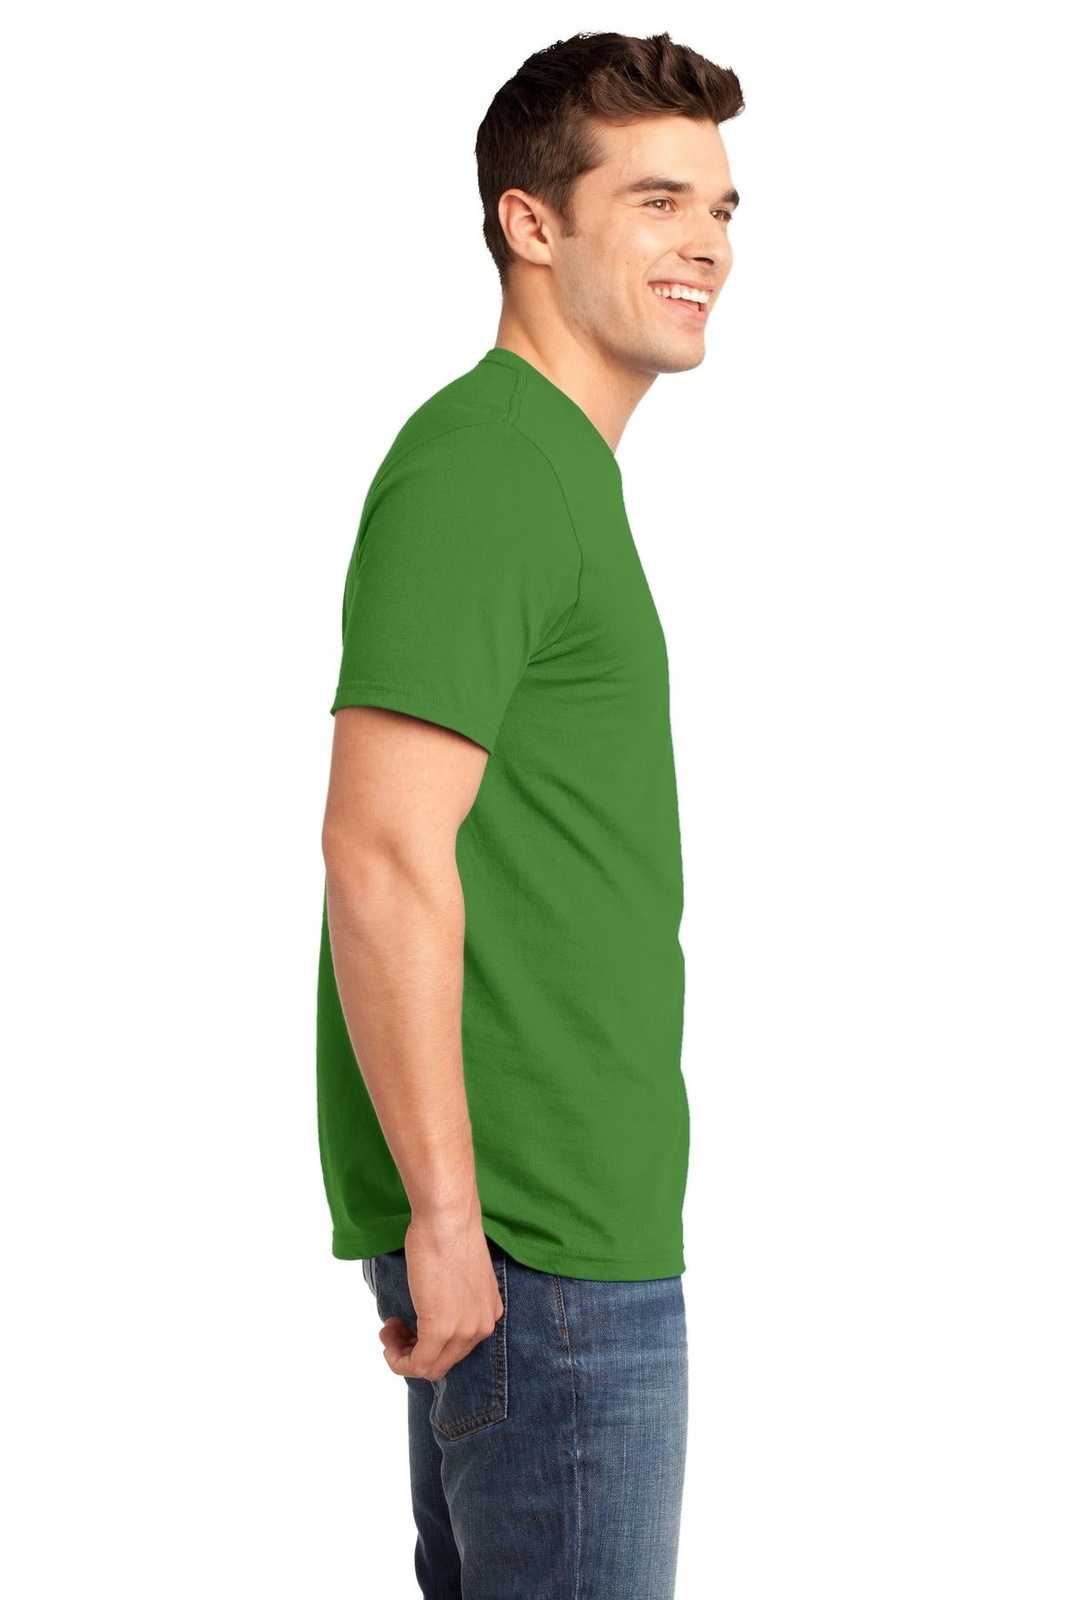 District DT6000 Very Important Tee - Kiwi Green - HIT a Double - 3